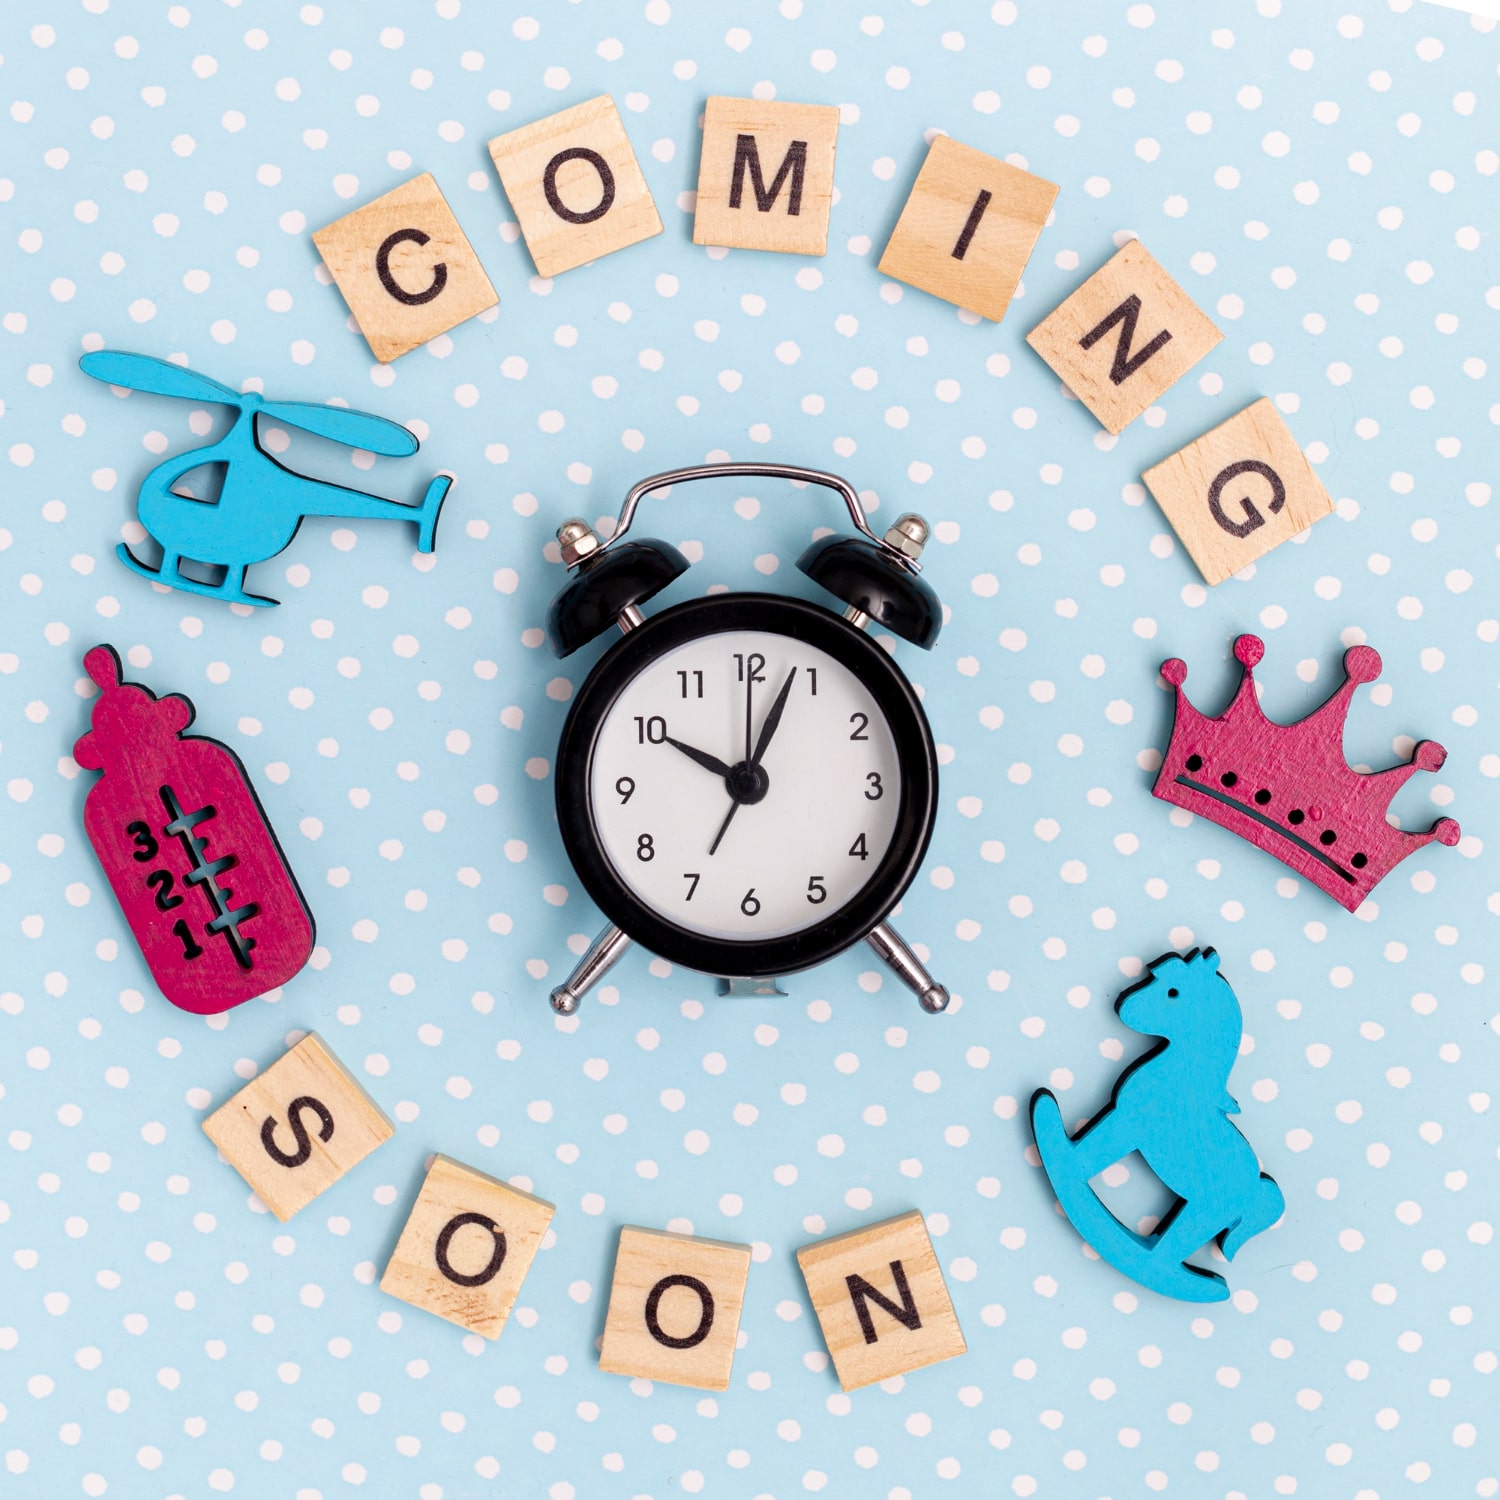 Timeless keepsake with personalized clocks, perfect baby shower gifts.